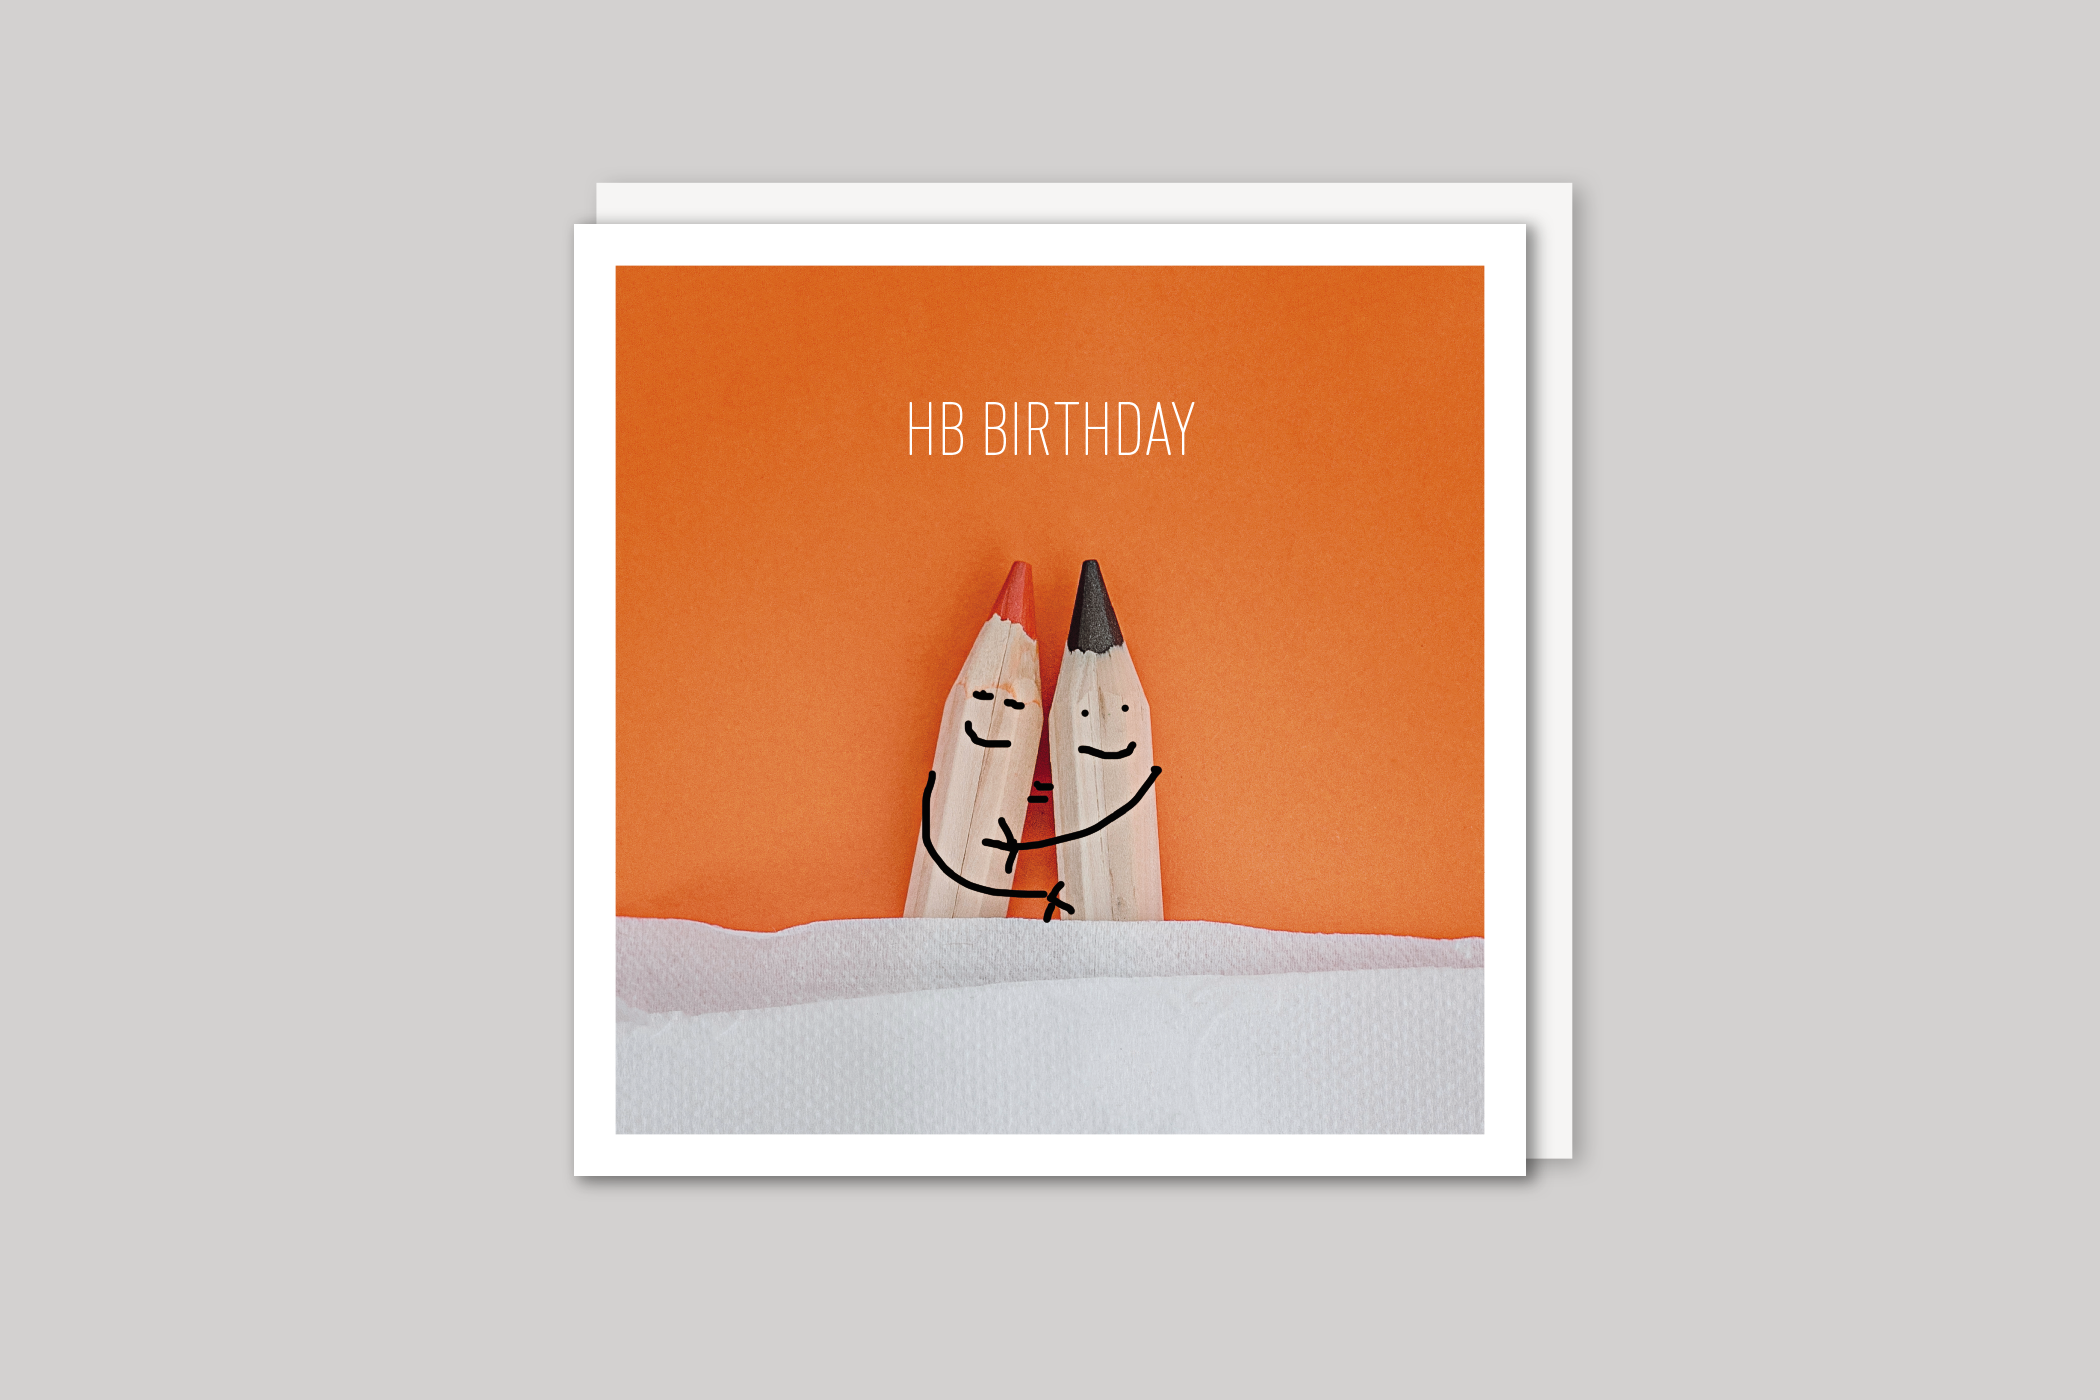 HB Birthday from Beautiful Days range of contemporary photographic cards by Icon, back page.